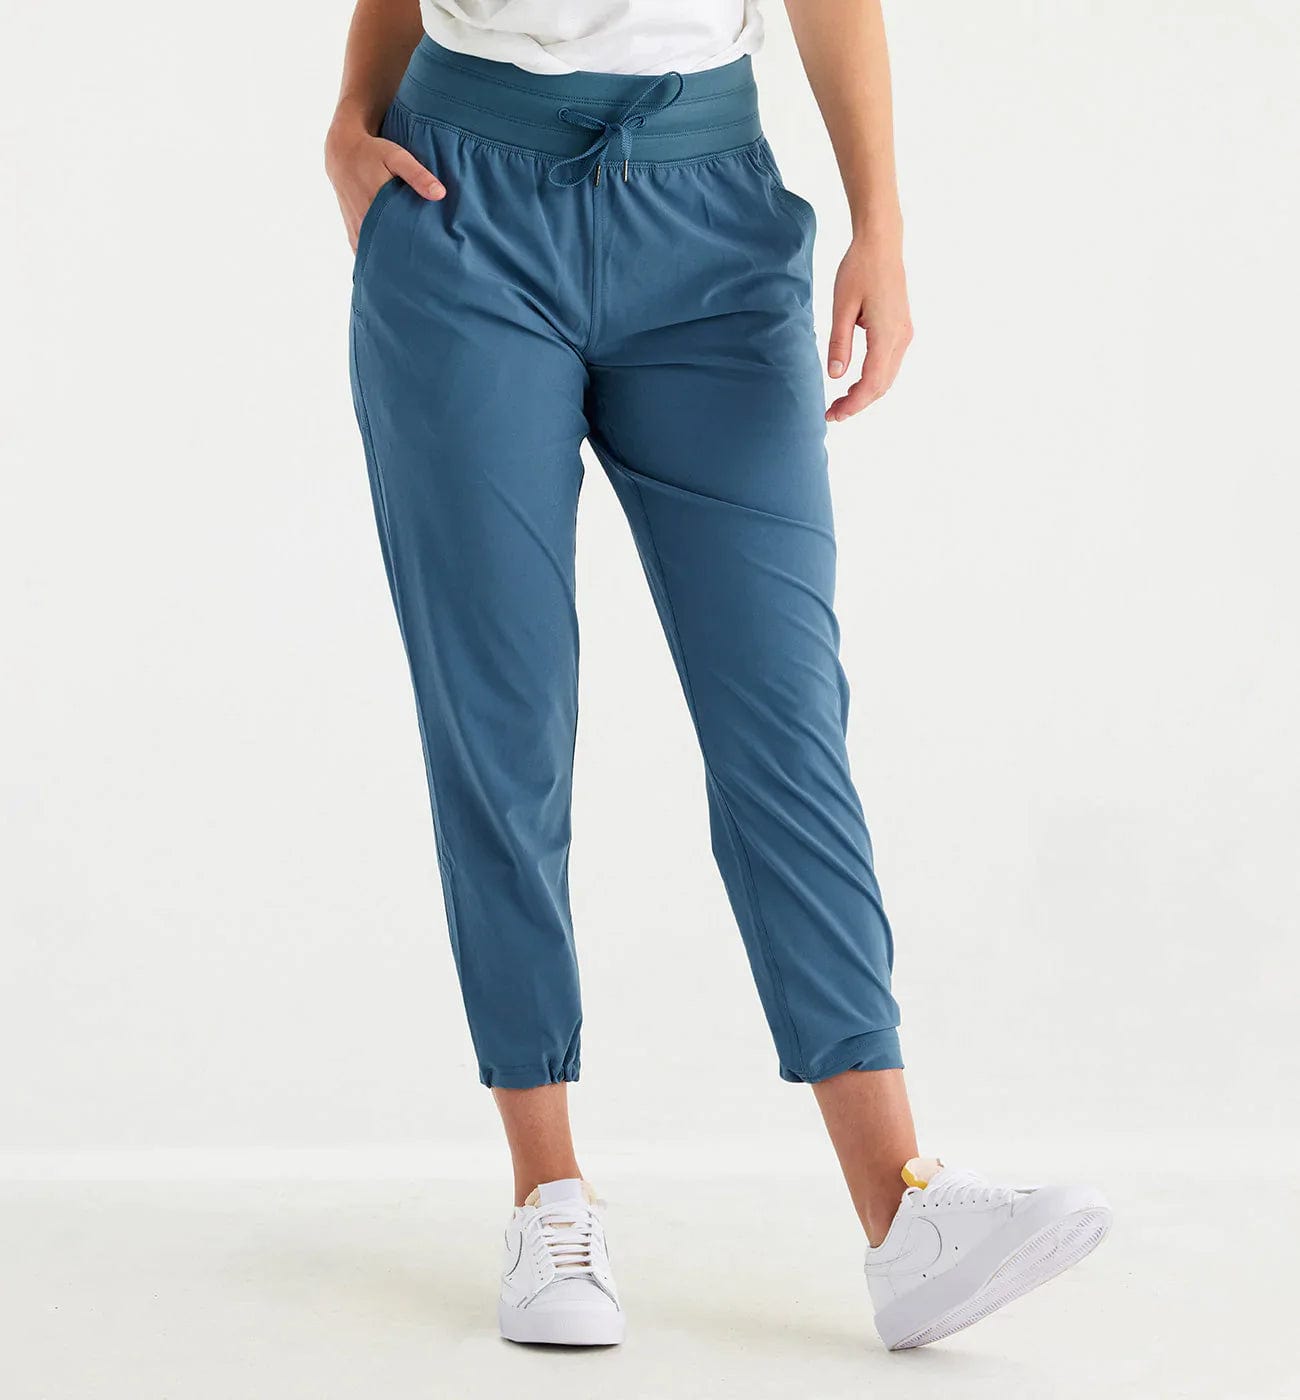 Free Fly Apparel Pants Pacific Blue / XS Women's Breeze Cropped Pant